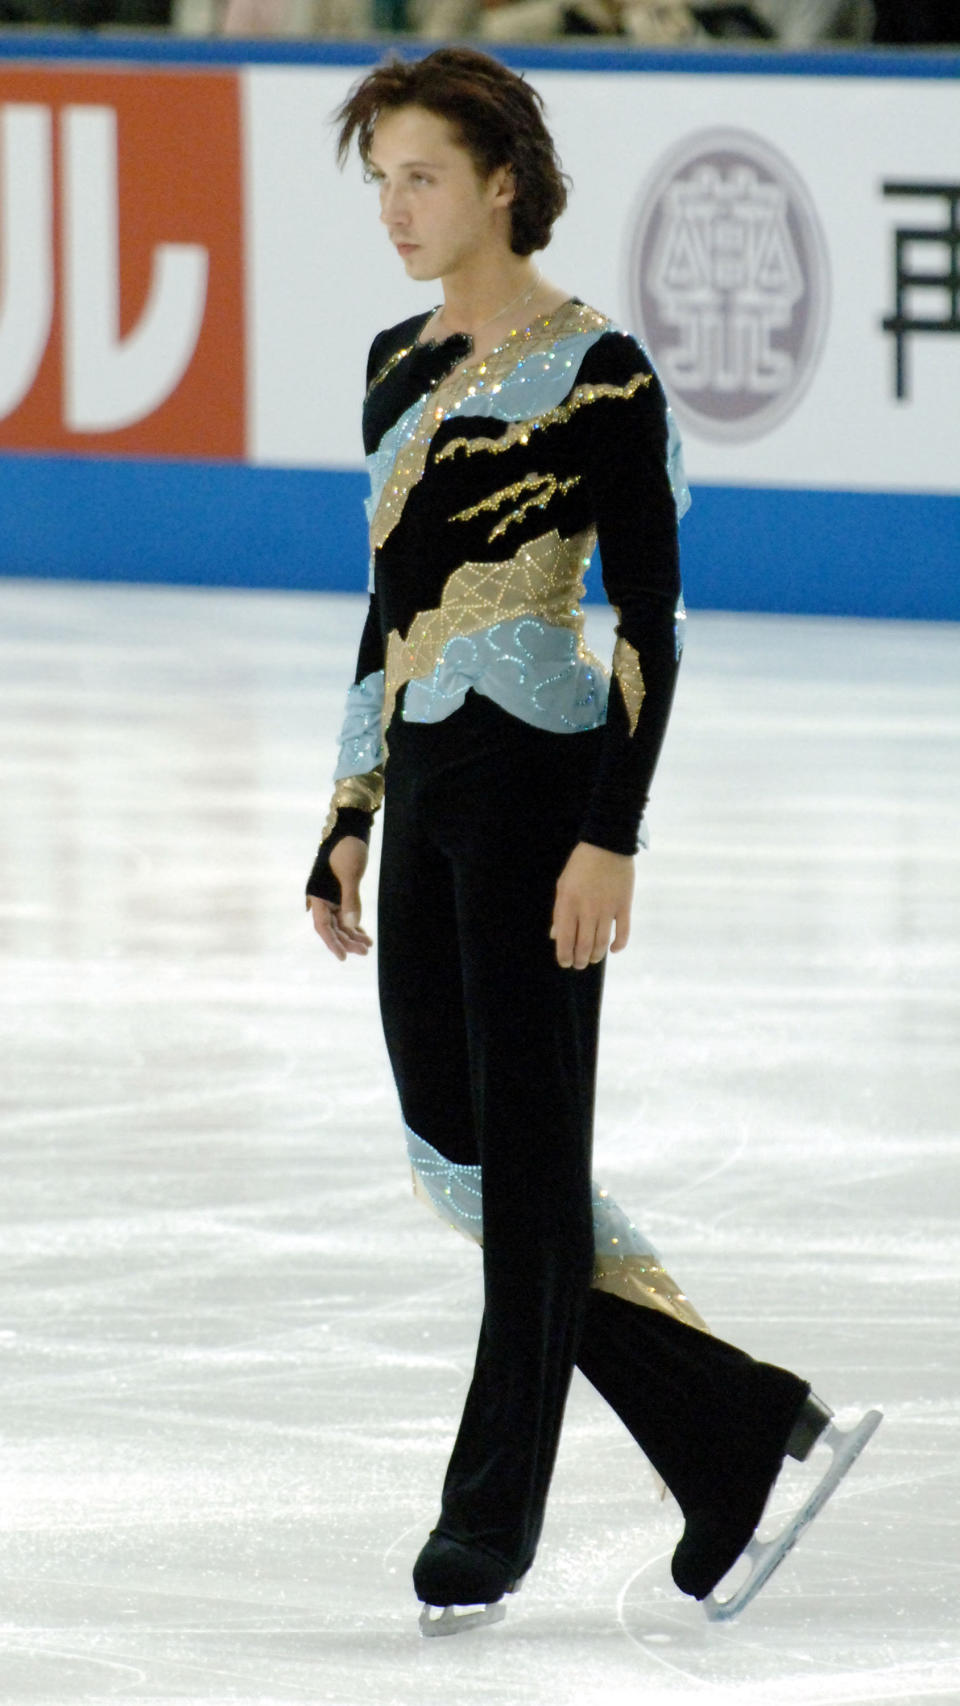 Competing&nbsp;at the Japan International Challenge figure skating cup competition in January 2005.